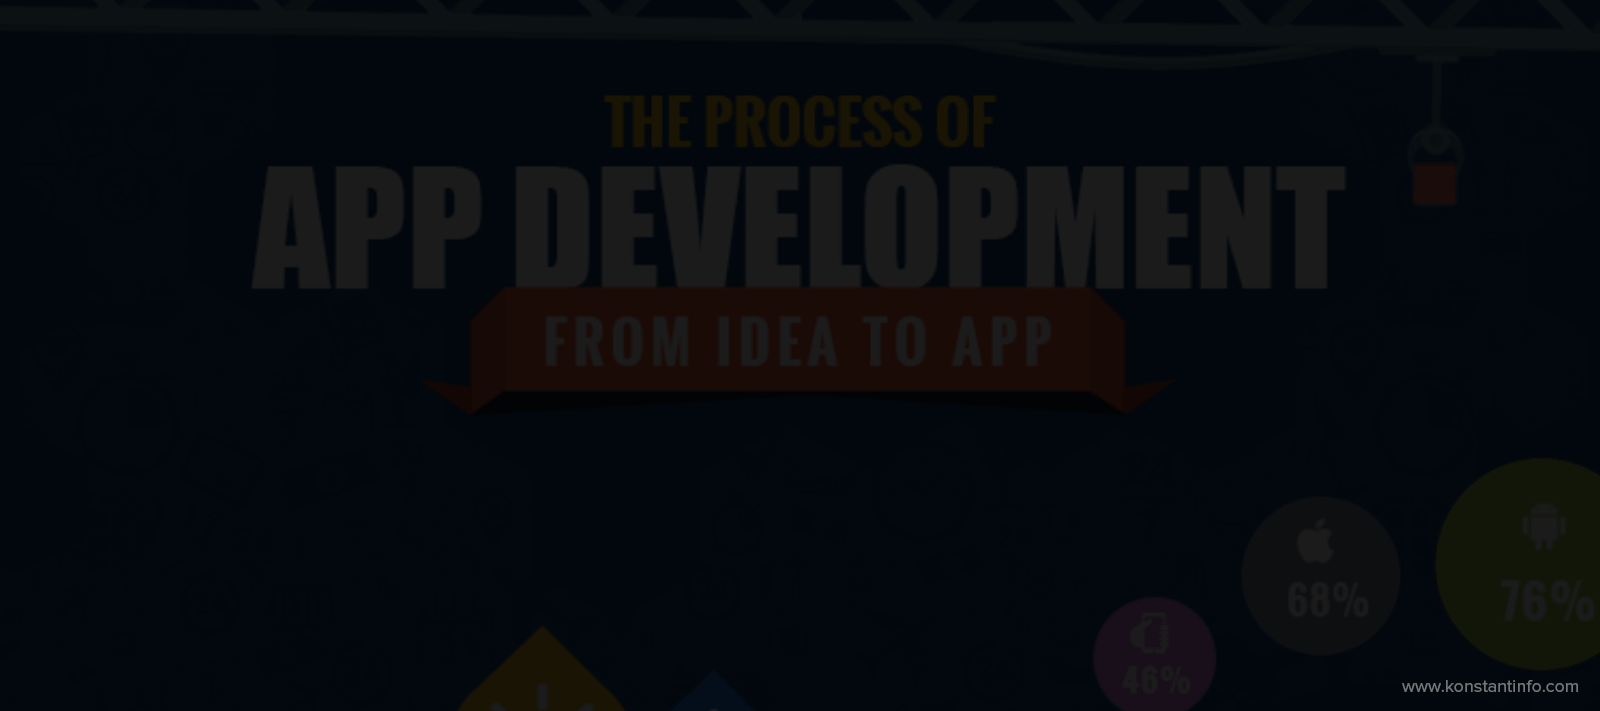 Infographic : The Process of App Development – From Idea to App